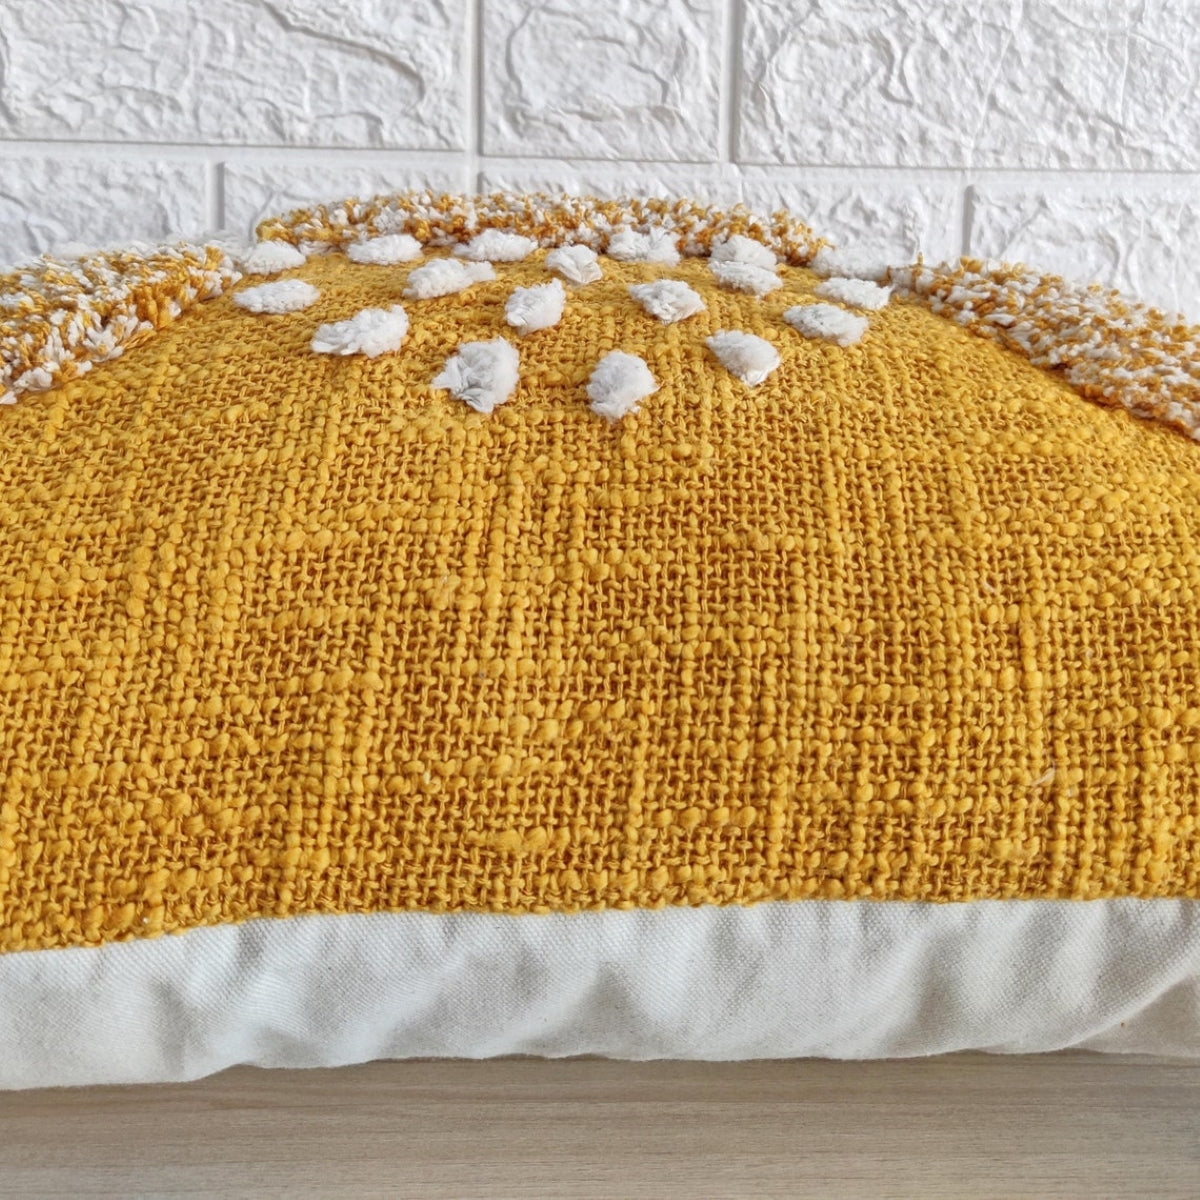 Mustard Yellow & Ivory Hand Embroidered Tufted Cushion Cover